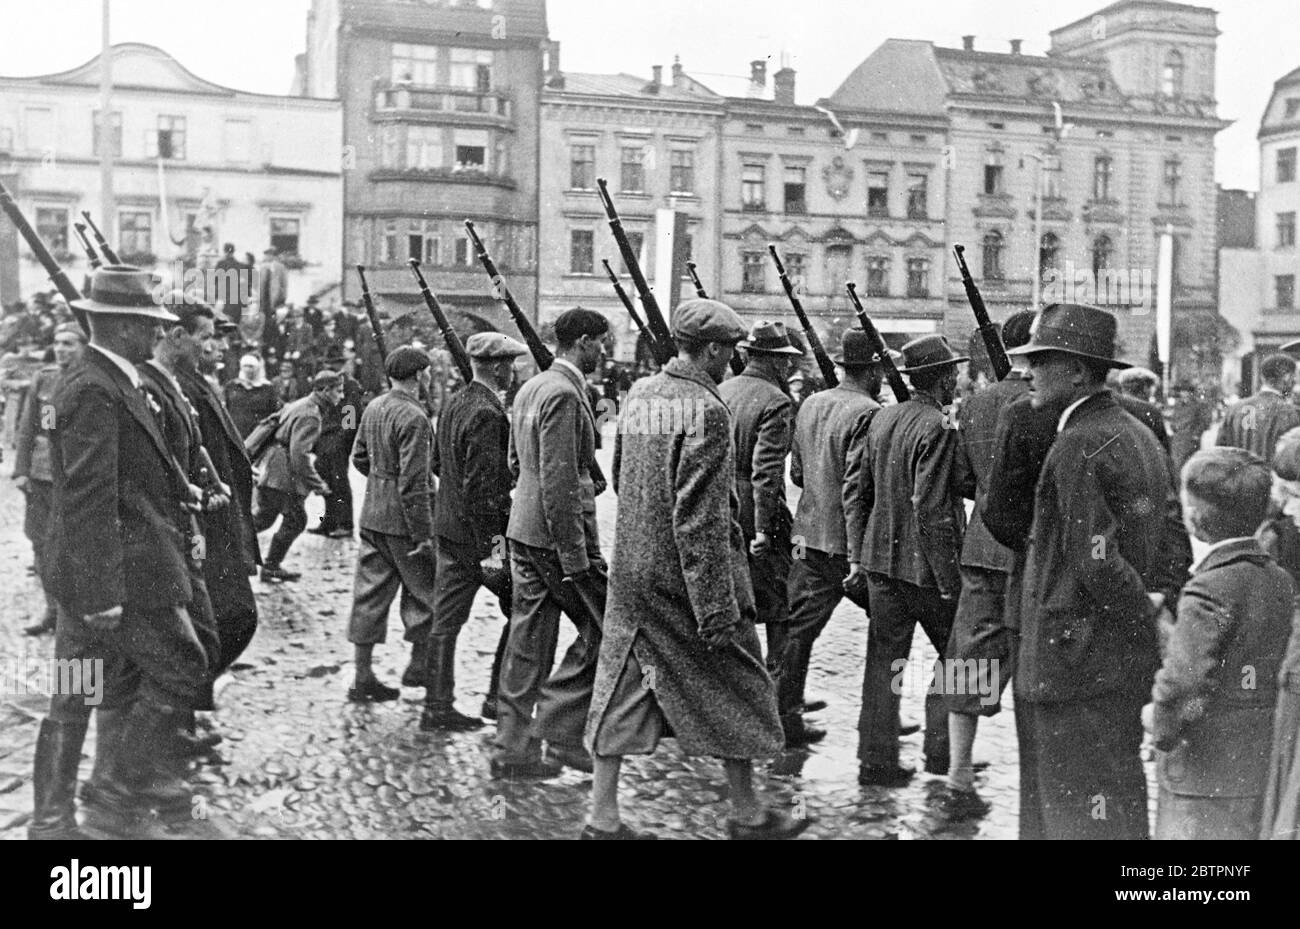 Poland takes over Teschen. A Polish army of occupation is now in possession at Teschen, the district which was ceded to Poland by Czechoslovakia in compliance with the Polish ultimatum. The occupation followed that of the Sudetenland by Germany. Photo shows, men of the Polish 'Free Corps' marching through Teschen , with rifles, though in civilian dresses the Polish forces occupied the city. . 4 October 1938 Stock Photo